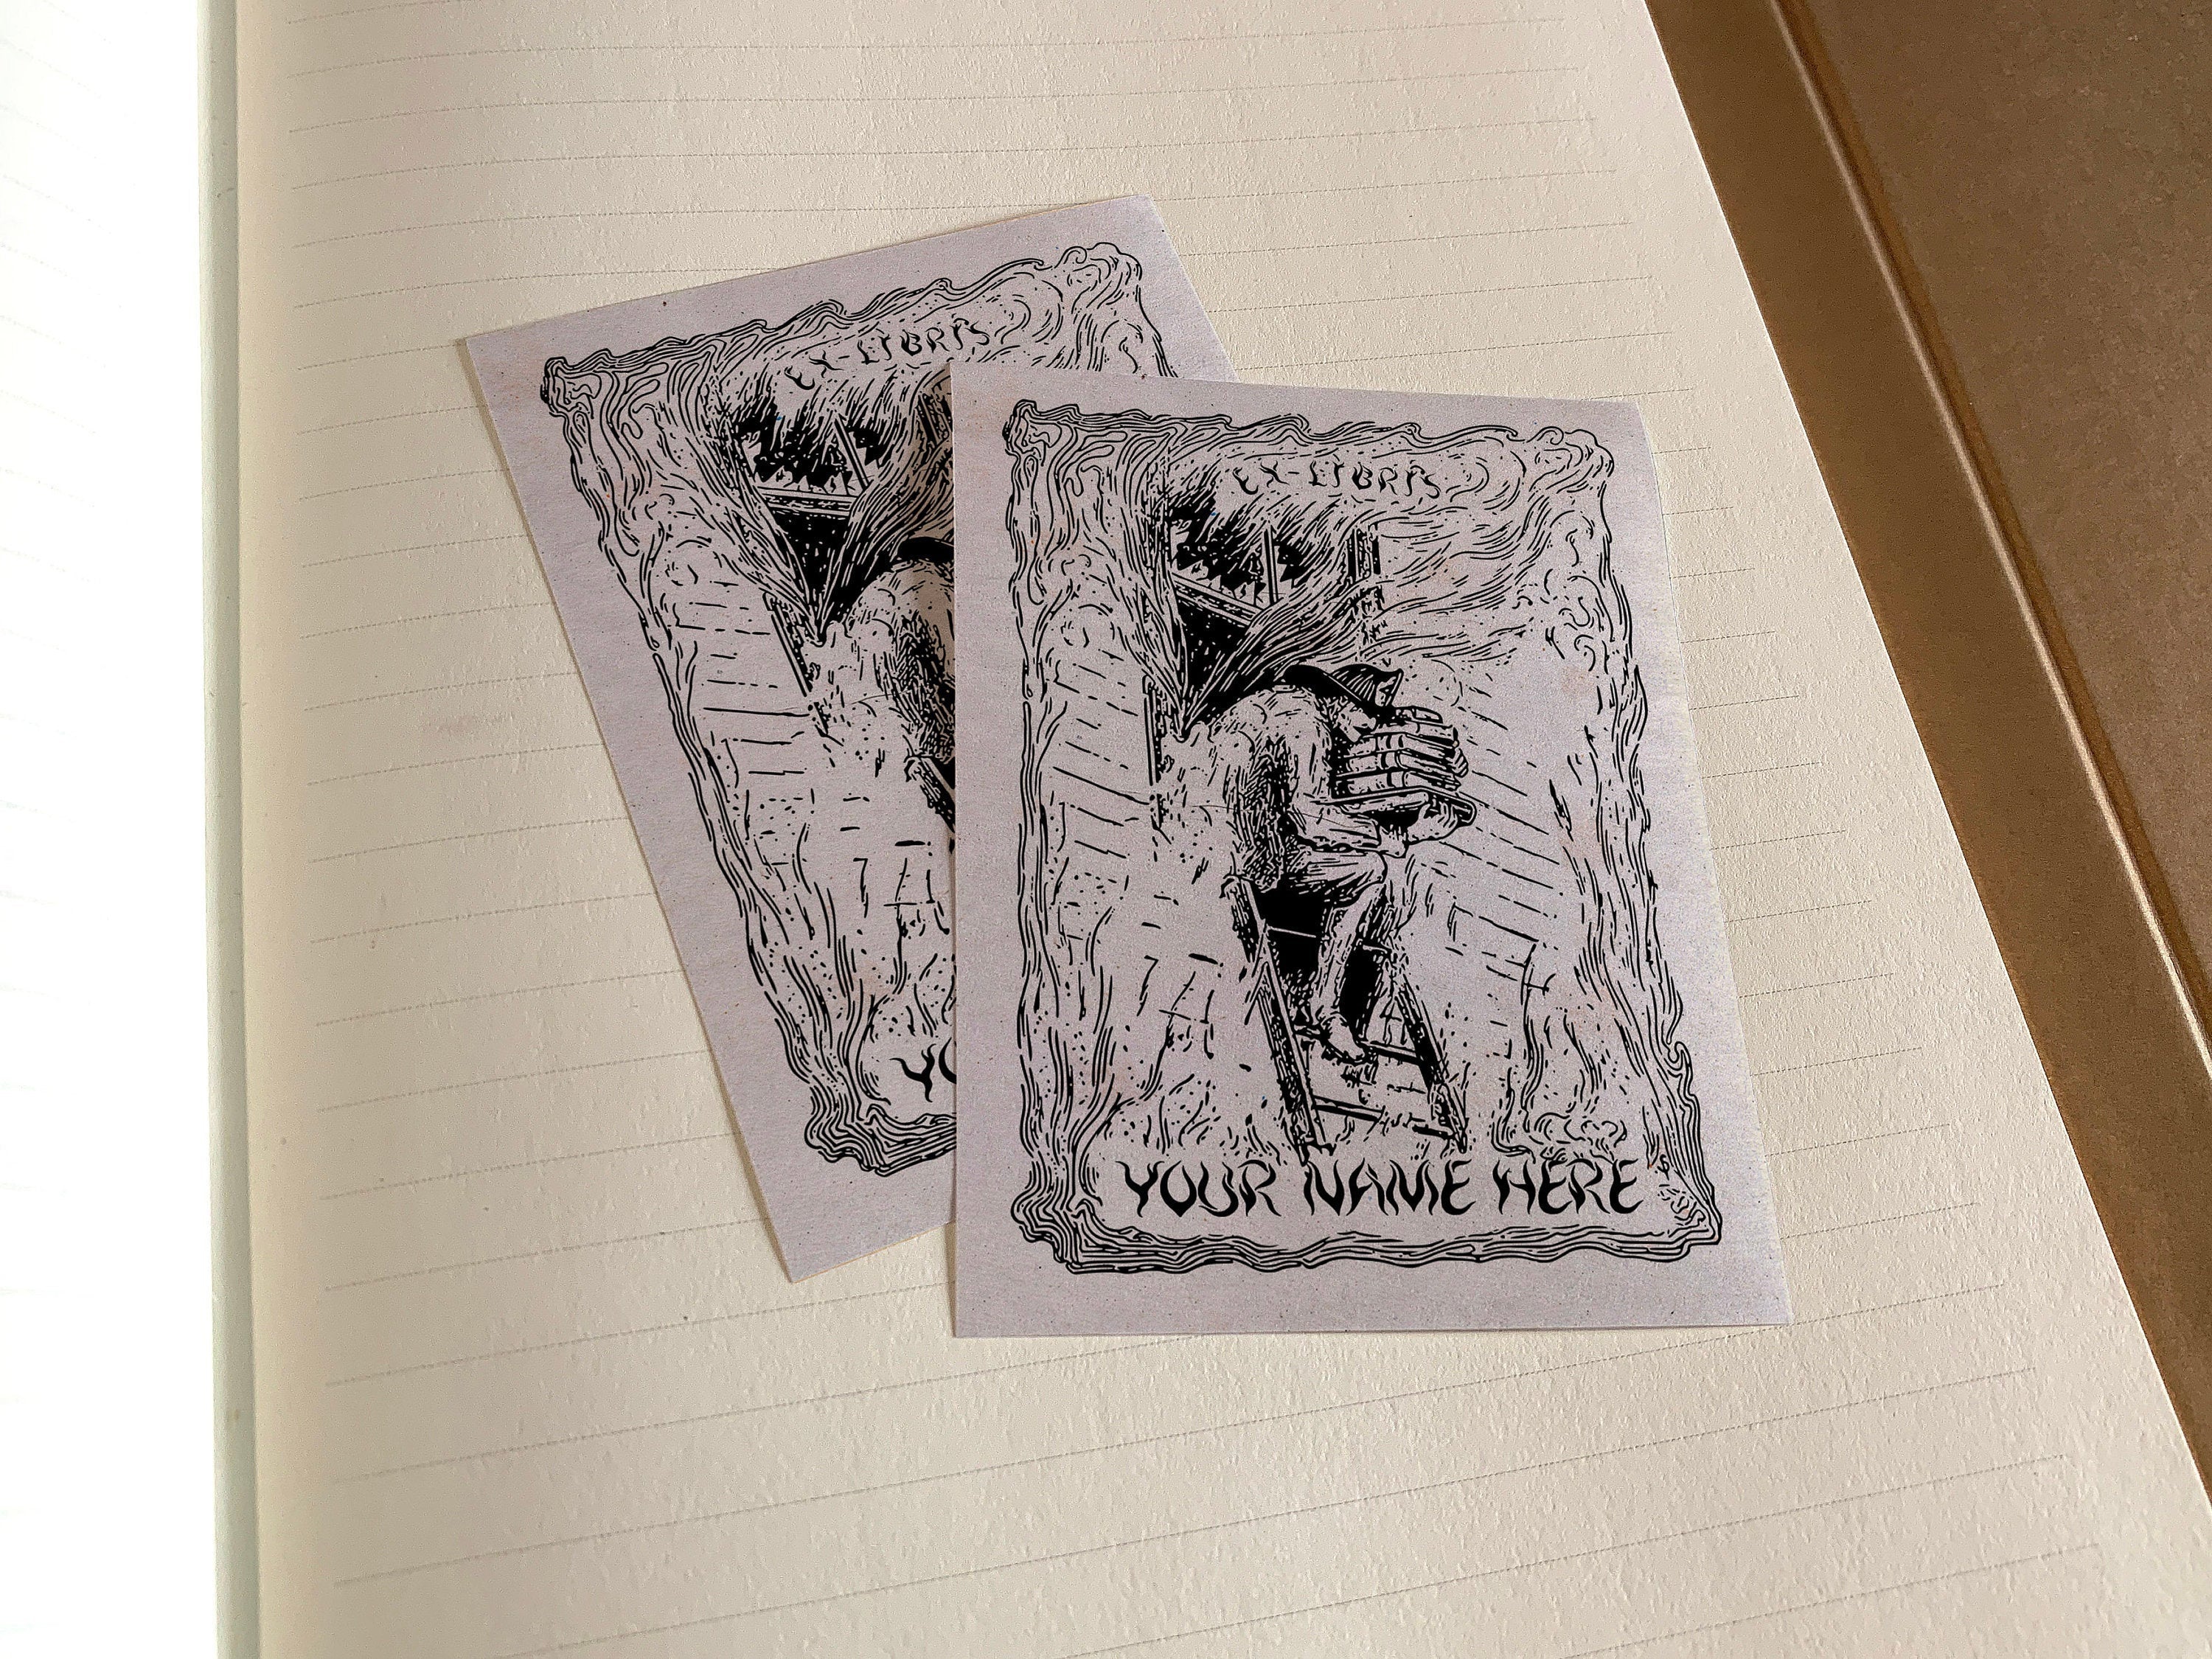 Firefighter Saving Books, Personalized Ex-Libris Bookplates, Crafted on Traditional Gummed Paper, 3in x 4in, Set of 30